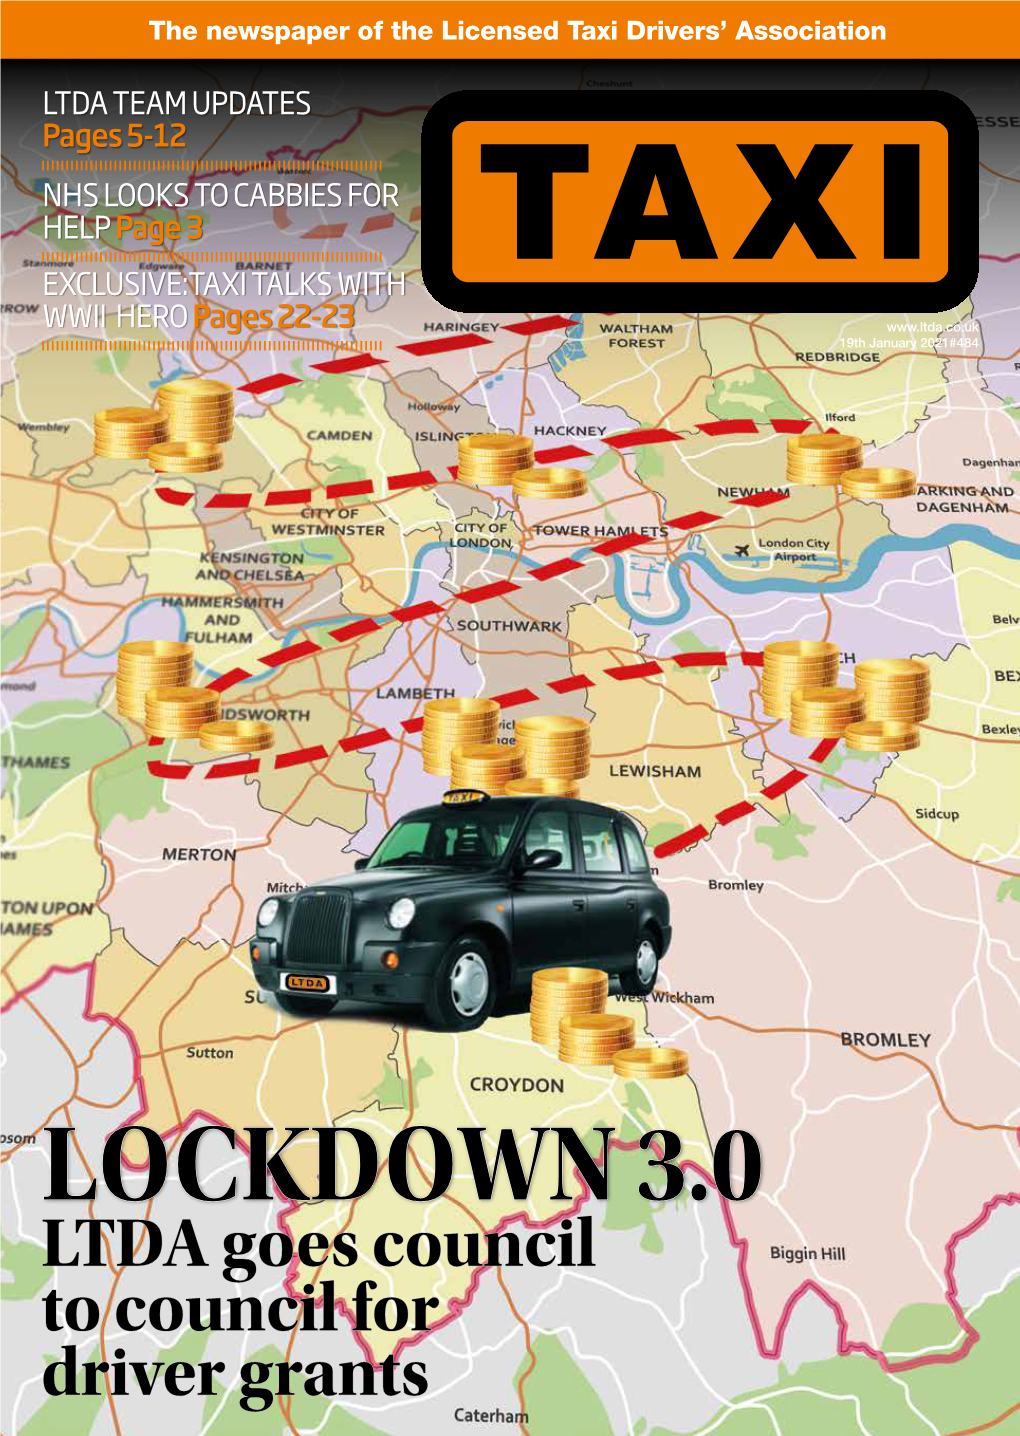 LTDA Goes Council to Council for Driver Grants 2